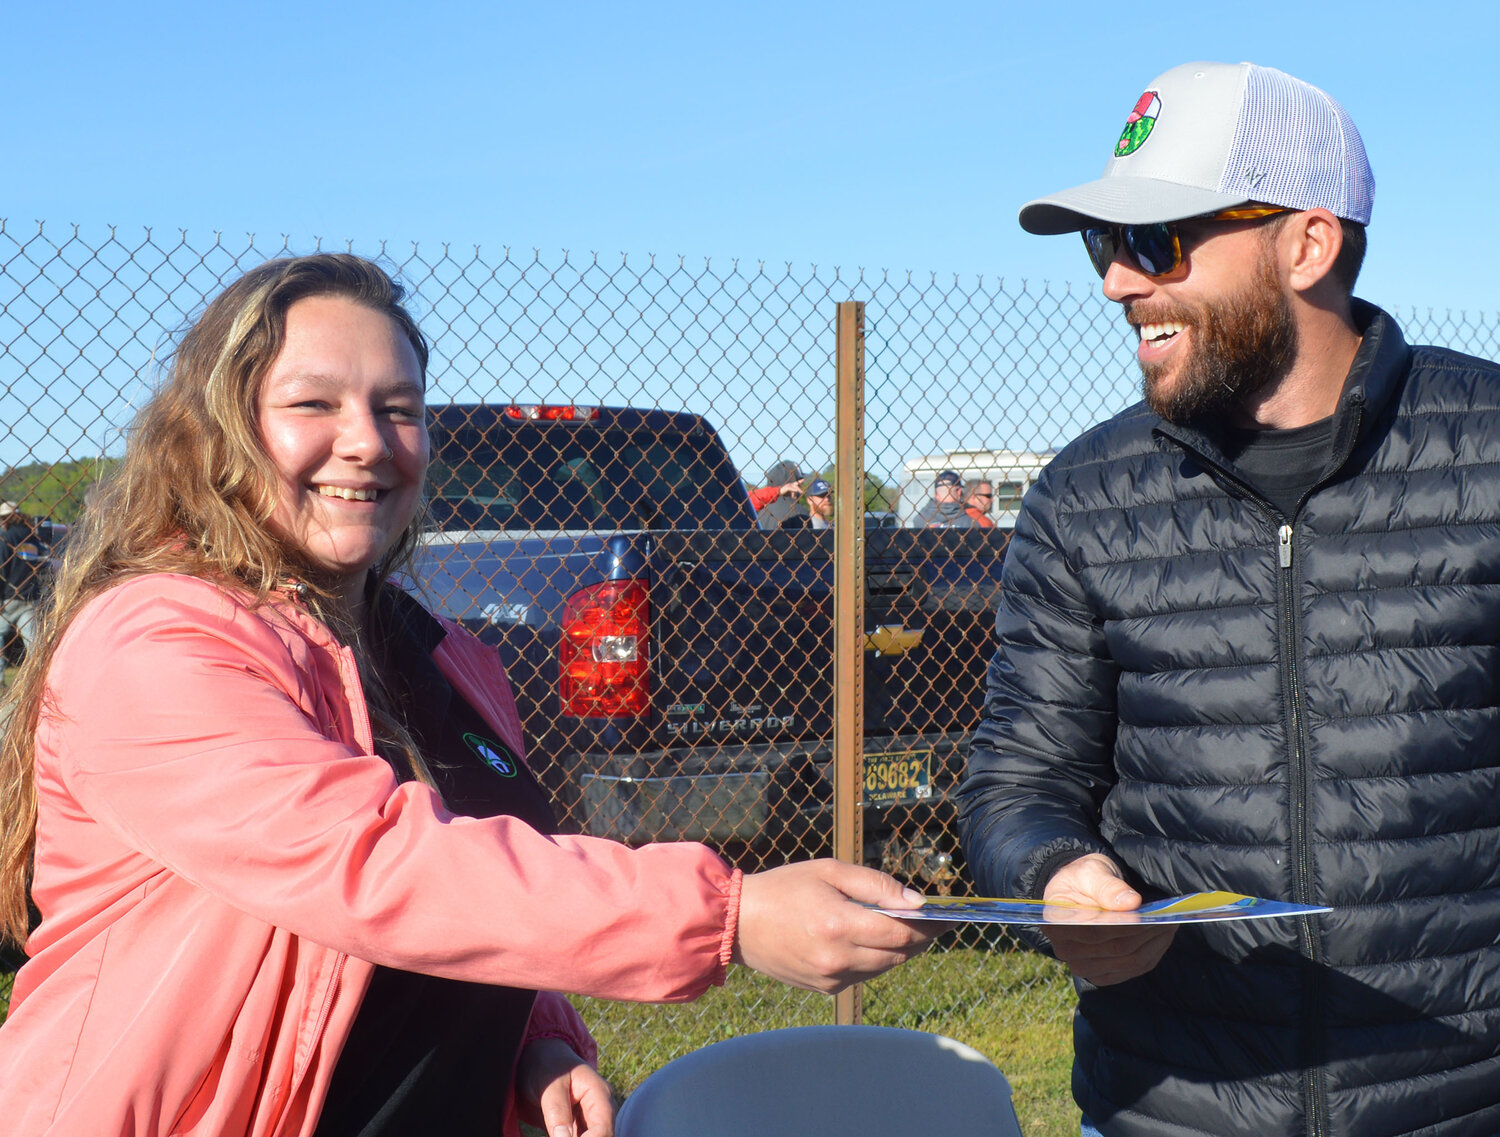 Meghan Niddrie, Community Relations Officer for the Office of Highway Safety, gets an autograph from NASCAR driver Ross Chastain Friday during the Melvin Joseph Memorial event at Georgetown Speedway. Chastain is a goodwill ambassador for the Office of Highway Safety, promoting safe driving.